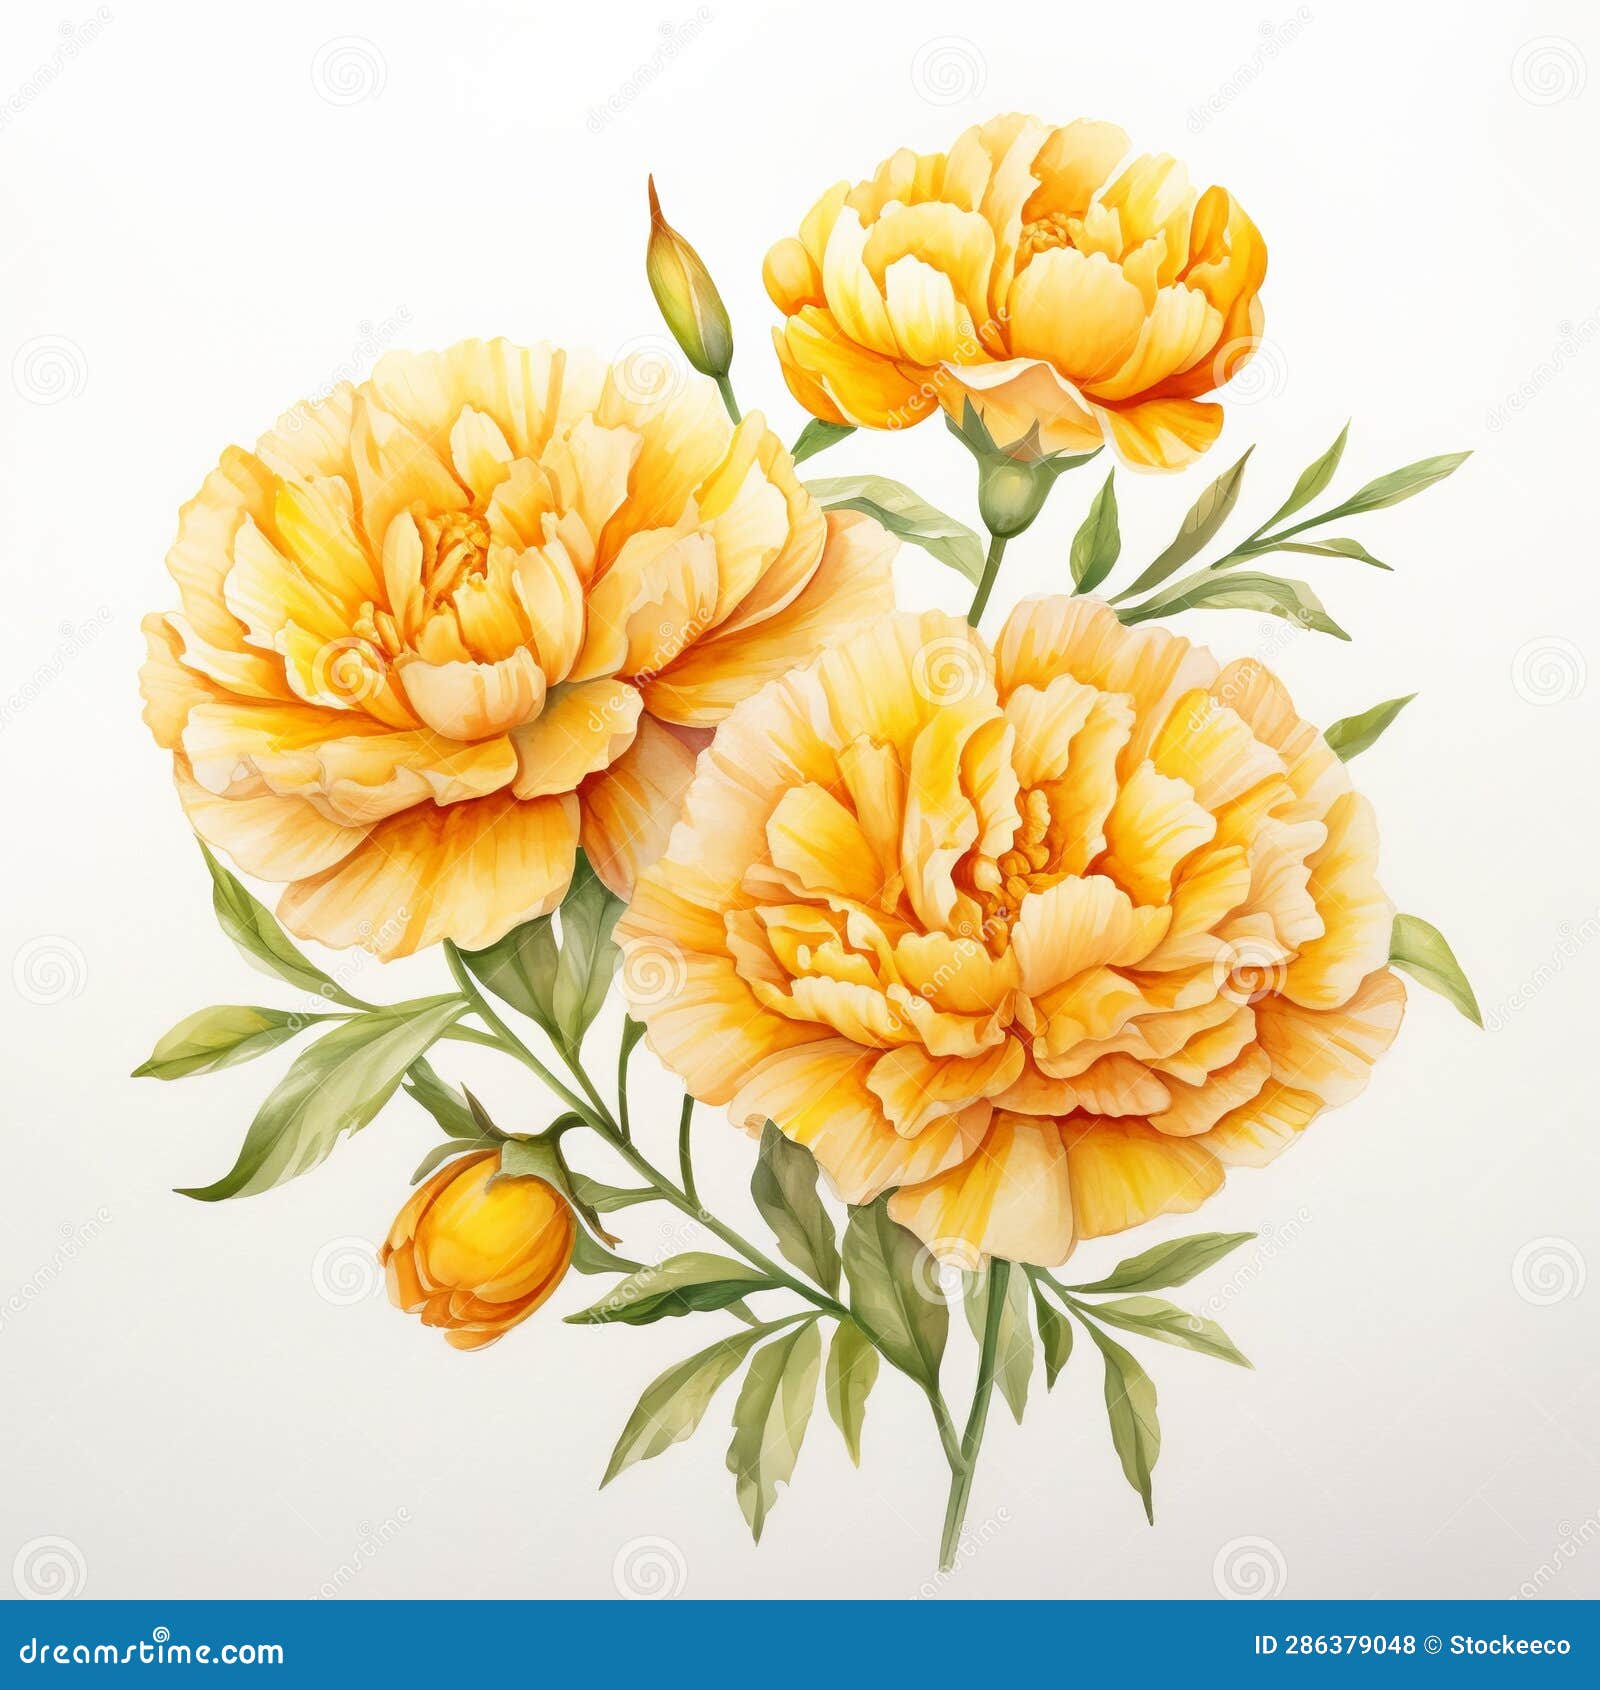 marigold watercolor painting: white love flowers on white background